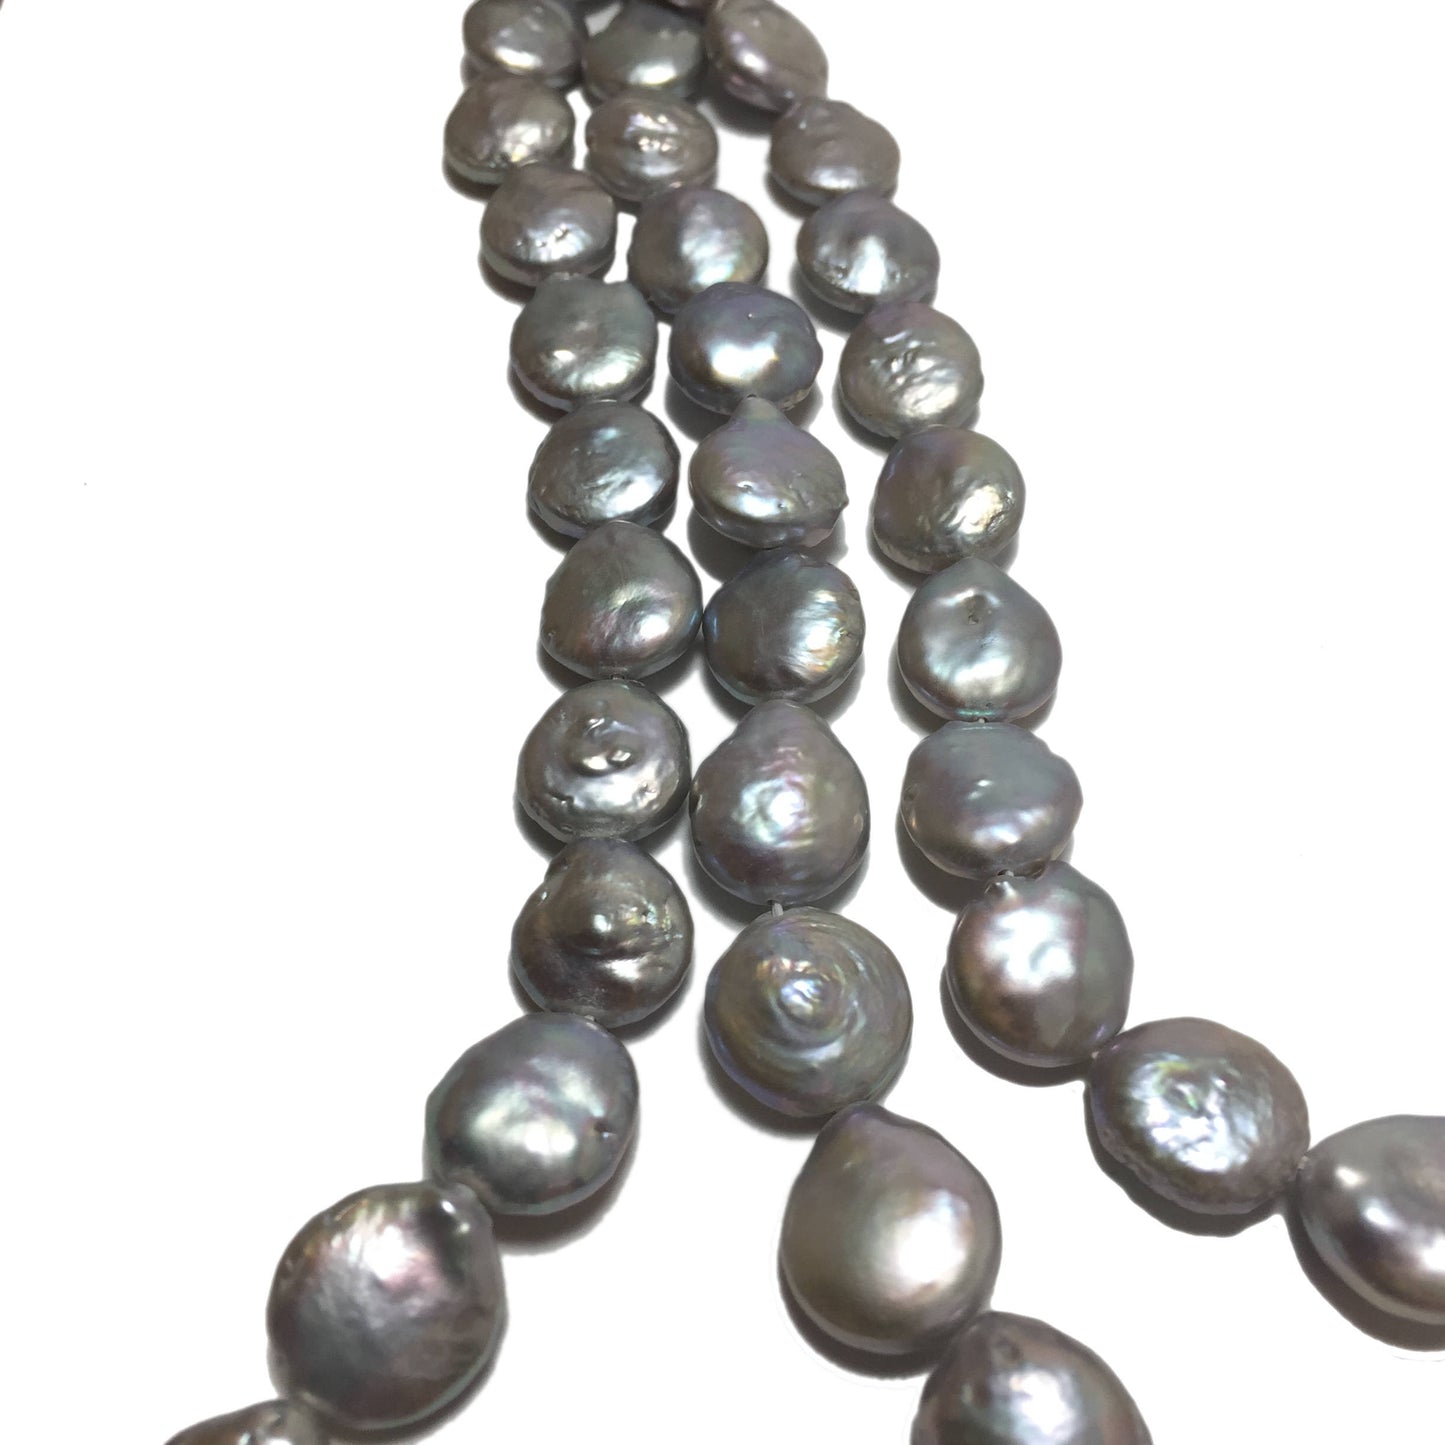 Coin Pearls, 9.5-10mm Silver Freshwater Pearls in 16 inches, COIN002